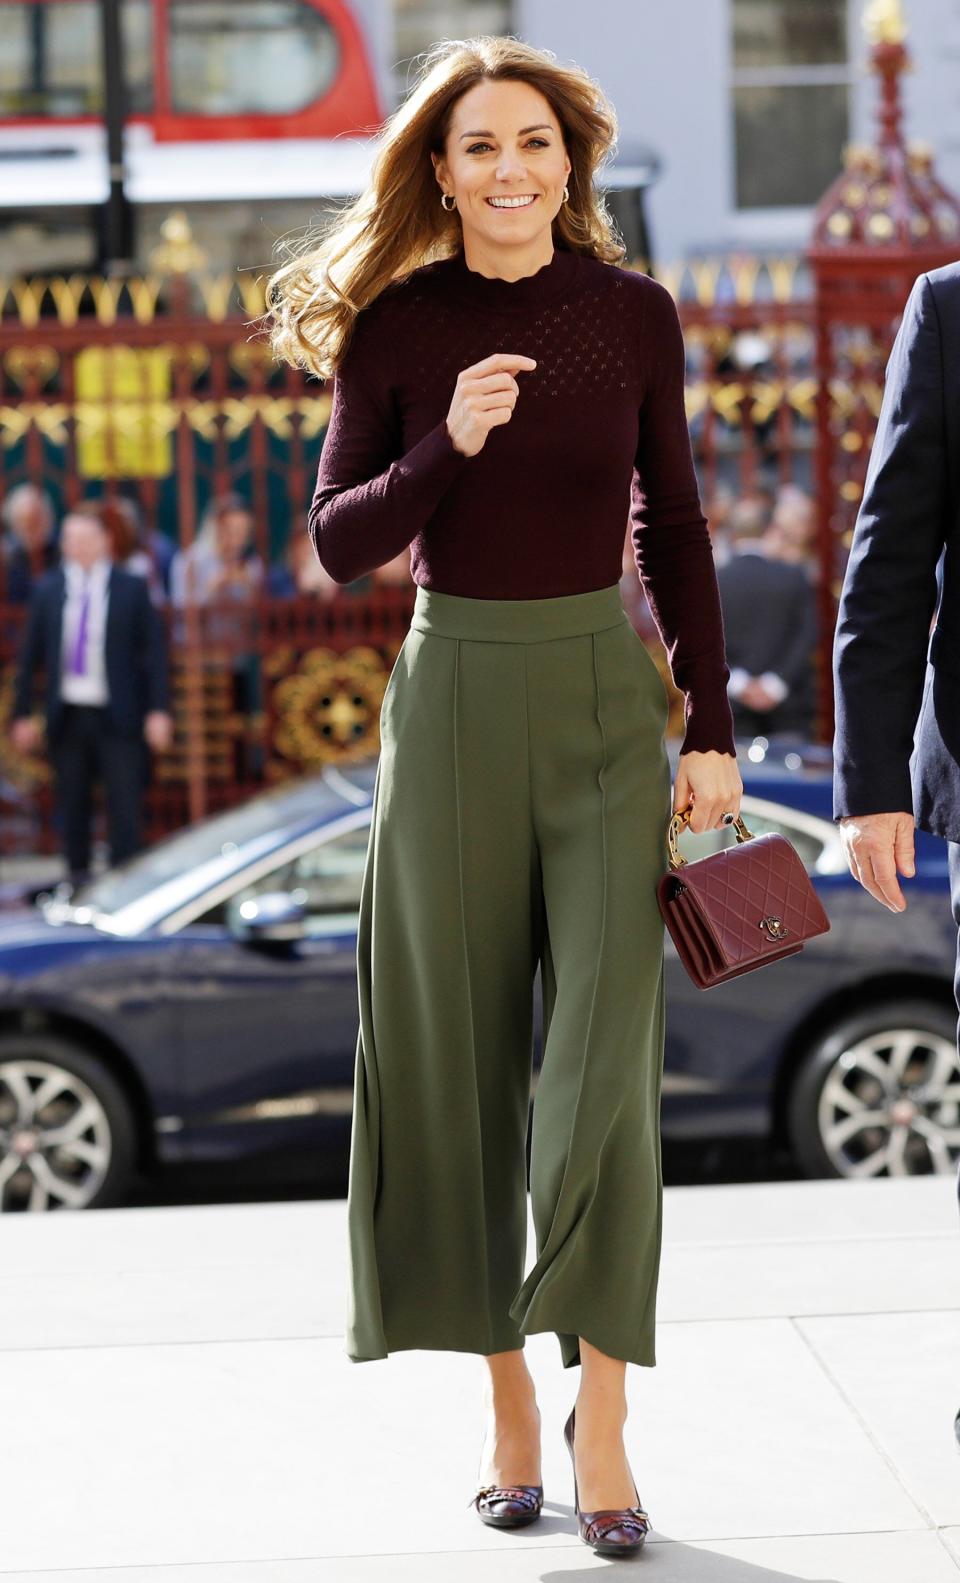 The Duchess of Cambridge <a href="https://people.com/royals/kate-middleton-steps-out-in-the-perfect-fall-style-that-has-a-connection-to-meghan-markle/" rel="nofollow noopener" target="_blank" data-ylk="slk:visited the Natural History Museum in London;elm:context_link;itc:0;sec:content-canvas" class="link ">visited the Natural History Museum in London</a> to learn how the Angela Marmont Centre for U.K. Biodiversity is helping to protect wildlife in the U.K. For the occasion, Kate wore a plum-colored sweater with scallop detail, olive green culottes, and <a href="https://people.com/royals/kate-middleton-chanel-plum-handbag-look-for-less/" rel="nofollow noopener" target="_blank" data-ylk="slk:carried a gorgeous dark purple Chanel bag;elm:context_link;itc:0;sec:content-canvas" class="link ">carried a gorgeous dark purple Chanel bag</a>. <strong>Get the Look!</strong> Amazon Essentials Women's Lightweight Crewneck Sweater, $19.50–$24; <a href="https://www.amazon.com/Amazon-Essentials-Crewneck-Sweater-Burgundy/dp/B079RPS46K/ref=as_li_ss_tl?dchild=1&keywords=women+plum+sweater&qid=1571082254&sr=8-7&linkCode=ll1&tag=poamzfkatemiddletonfallstylekphillips1019-20&linkId=d9bc4e48d3e2b2fe0f174c7f0c9ec78a&language=en_US" rel="nofollow noopener" target="_blank" data-ylk="slk:amazon.com;elm:context_link;itc:0;sec:content-canvas" class="link ">amazon.com</a> Ted Baker Frill Trim Sweater, $139; <a href="https://click.linksynergy.com/deeplink?id=93xLBvPhAeE&mid=1237&murl=https%3A%2F%2Fshop.nordstrom.com%2Fs%2Fted-baker-london-frill-trim-sweater%2F5386547&u1=PEO%2CShopping%3AEverythingYouNeedtoCopyKateMiddleton%E2%80%99sChicWinterStyle%2Ckamiphillips2%2CUnc%2CGal%2C7360903%2C202002%2CI" rel="nofollow noopener" target="_blank" data-ylk="slk:nordstrom.com;elm:context_link;itc:0;sec:content-canvas" class="link ">nordstrom.com</a> J.Crew Crewneck Sweater in Super Soft Yarn, $79.50; <a href="https://click.linksynergy.com/deeplink?id=93xLBvPhAeE&mid=1237&murl=https%3A%2F%2Fshop.nordstrom.com%2Fs%2Fj-crew-crewneck-sweater-in-super-soft-yarn-regular-plus-size-nordstrom-exclusive%2F5343838&u1=PEO%2CShopping%3AEverythingYouNeedtoCopyKateMiddleton%E2%80%99sChicWinterStyle%2Ckamiphillips2%2CUnc%2CGal%2C7360903%2C202002%2CI" rel="nofollow noopener" target="_blank" data-ylk="slk:nordstrom.com;elm:context_link;itc:0;sec:content-canvas" class="link ">nordstrom.com</a> Uniqlo Extra Fine Merino Crew Neck Sweater, $39.90; <a href="https://click.linksynergy.com/deeplink?id=93xLBvPhAeE&mid=40462&murl=https%3A%2F%2Fwww.uniqlo.com%2Fus%2Fen%2Fwomen-extra-fine-merino-crew-neck-sweater-418668.html&u1=PEO%2CShopping%3AEverythingYouNeedtoCopyKateMiddleton%E2%80%99sChicWinterStyle%2Ckamiphillips2%2CUnc%2CGal%2C7360903%2C202002%2CI" rel="nofollow noopener" target="_blank" data-ylk="slk:uniqlo.com;elm:context_link;itc:0;sec:content-canvas" class="link ">uniqlo.com</a> ASOS Design Tailored Clean Culottes, $40; <a href="https://click.linksynergy.com/deeplink?id=93xLBvPhAeE&mid=35719&murl=https%3A%2F%2Fwww.asos.com%2Fus%2Fasos-design%2Fasos-design-tailored-clean-culottes%2Fprd%2F11008142&u1=PEO%2CShopping%3AEverythingYouNeedtoCopyKateMiddleton%E2%80%99sChicWinterStyle%2Ckamiphillips2%2CUnc%2CGal%2C7360903%2C202002%2CI" rel="nofollow noopener" target="_blank" data-ylk="slk:asos.com;elm:context_link;itc:0;sec:content-canvas" class="link ">asos.com</a> Vero Moda Wide Leg Pants, $26 (orig. $65); <a href="https://click.linksynergy.com/deeplink?id=93xLBvPhAeE&mid=35719&murl=https%3A%2F%2Fwww.asos.com%2Fus%2Fvero-moda%2Fvero-moda-wide-leg-pants%2Fprd%2F11788841&u1=PEO%2CShopping%3AEverythingYouNeedtoCopyKateMiddleton%E2%80%99sChicWinterStyle%2Ckamiphillips2%2CUnc%2CGal%2C7360903%2C202002%2CI" rel="nofollow noopener" target="_blank" data-ylk="slk:asos.com;elm:context_link;itc:0;sec:content-canvas" class="link ">asos.com</a> Anthropologie Jamey Knit Wide Leg Pants, $98; <a href="https://click.linksynergy.com/deeplink?id=93xLBvPhAeE&mid=39789&murl=https%3A%2F%2Fwww.anthropologie.com%2Fshop%2Fjamey-knit-wide-leg-pants&u1=PEO%2CShopping%3AEverythingYouNeedtoCopyKateMiddleton%E2%80%99sChicWinterStyle%2Ckamiphillips2%2CUnc%2CGal%2C7360903%2C202002%2CI" rel="nofollow noopener" target="_blank" data-ylk="slk:anthropologie.com;elm:context_link;itc:0;sec:content-canvas" class="link ">anthropologie.com</a> Line & Dot Poppy Pants, $99; <a href="http://www.anrdoezrs.net/links/8029122/type/dlg/sid/PEO,Shopping:EverythingYouNeedtoCopyKateMiddleton’sChicWinterStyle,kamiphillips2,Unc,Gal,7360903,202002,I/https://www.revolve.com/line-dot-poppy-pants/dp/LEAX-WP20/" rel="nofollow noopener" target="_blank" data-ylk="slk:revolve.com;elm:context_link;itc:0;sec:content-canvas" class="link ">revolve.com</a>